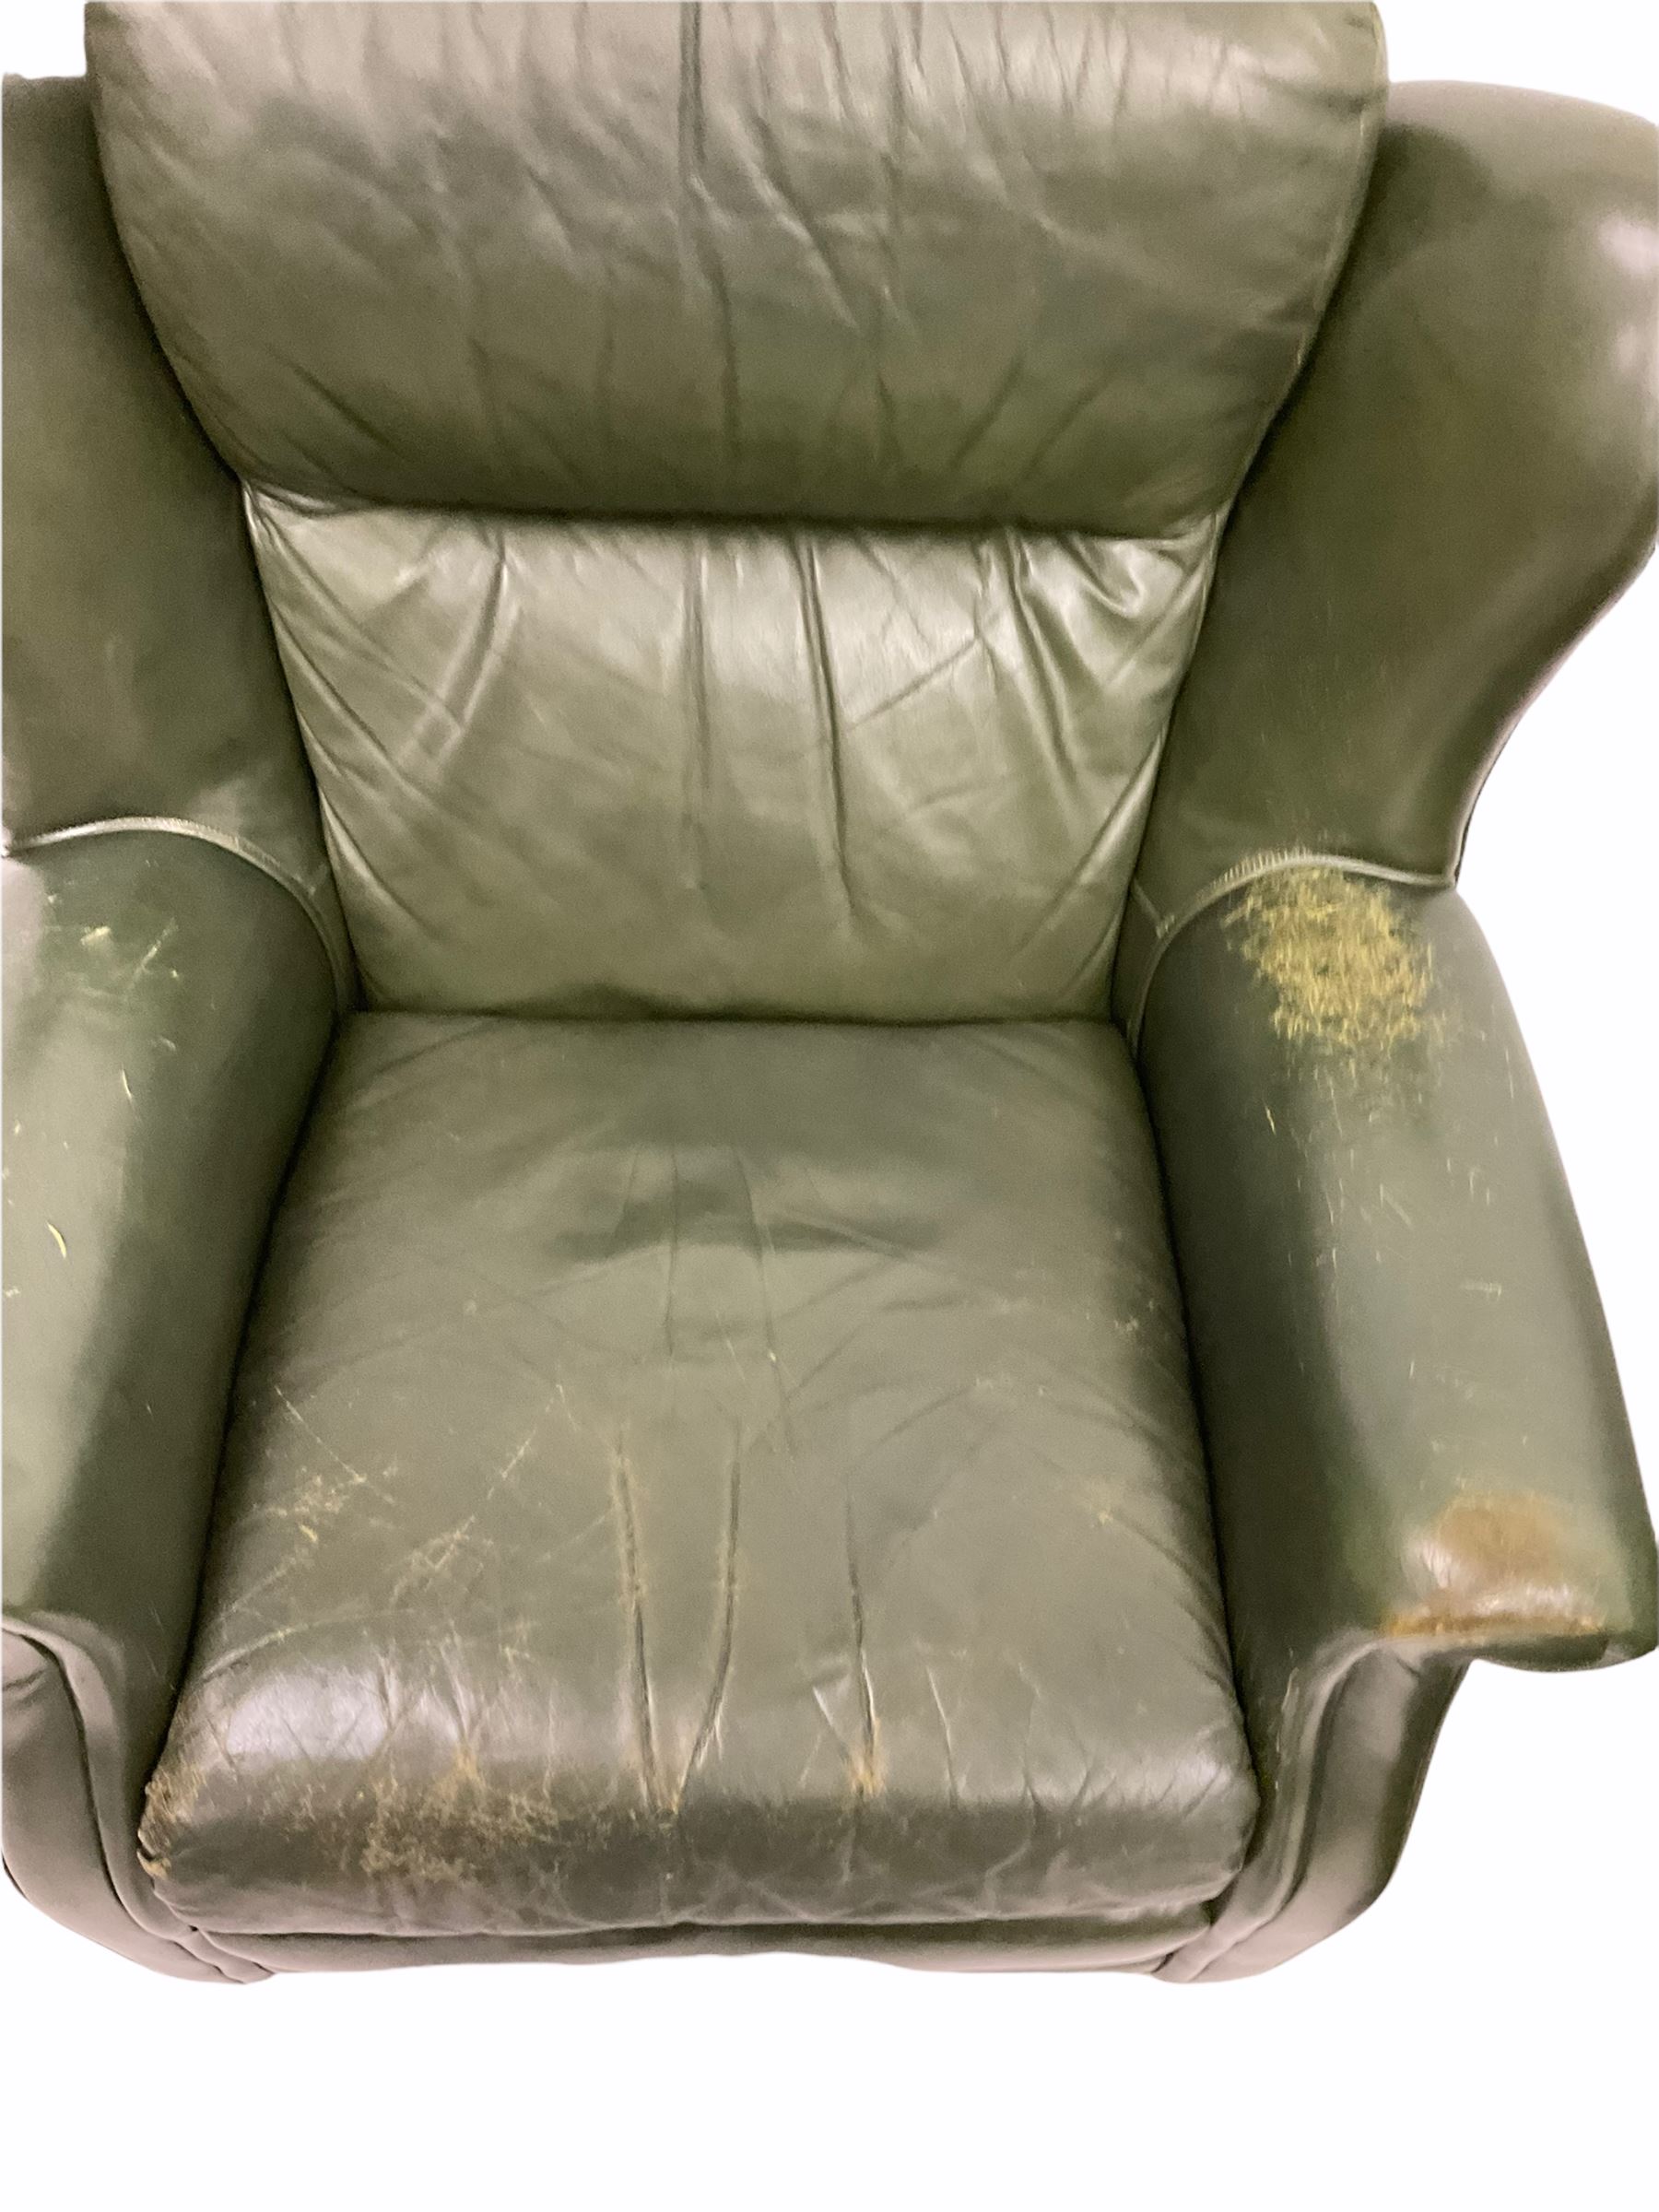 Pair of vintage green leather wing back armchairs - Image 3 of 3